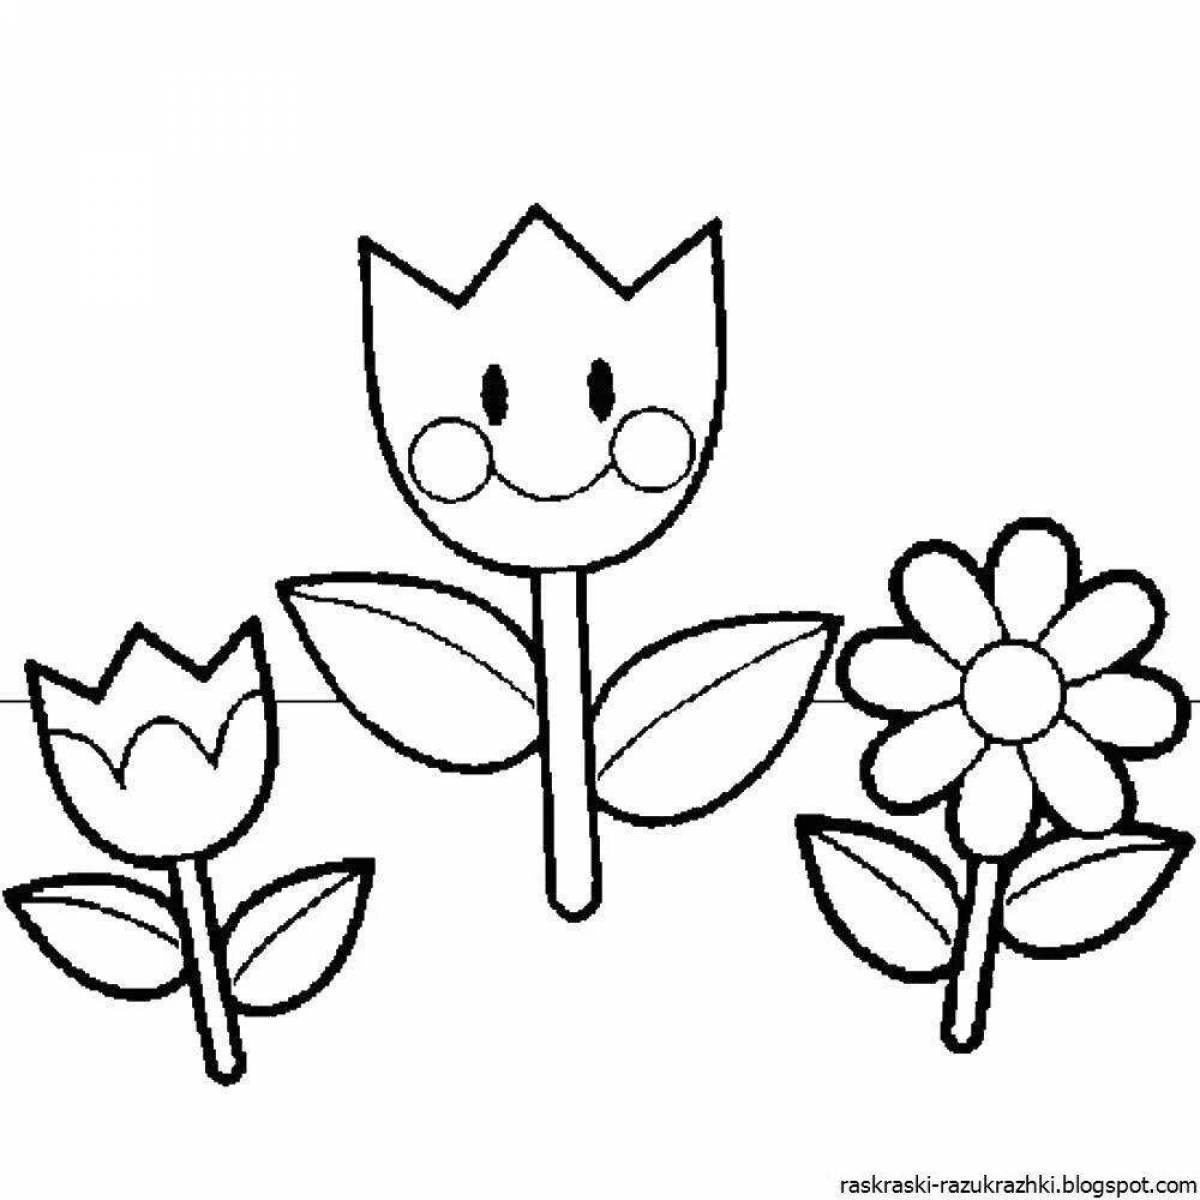 Cute flower coloring book for 5-6 year olds